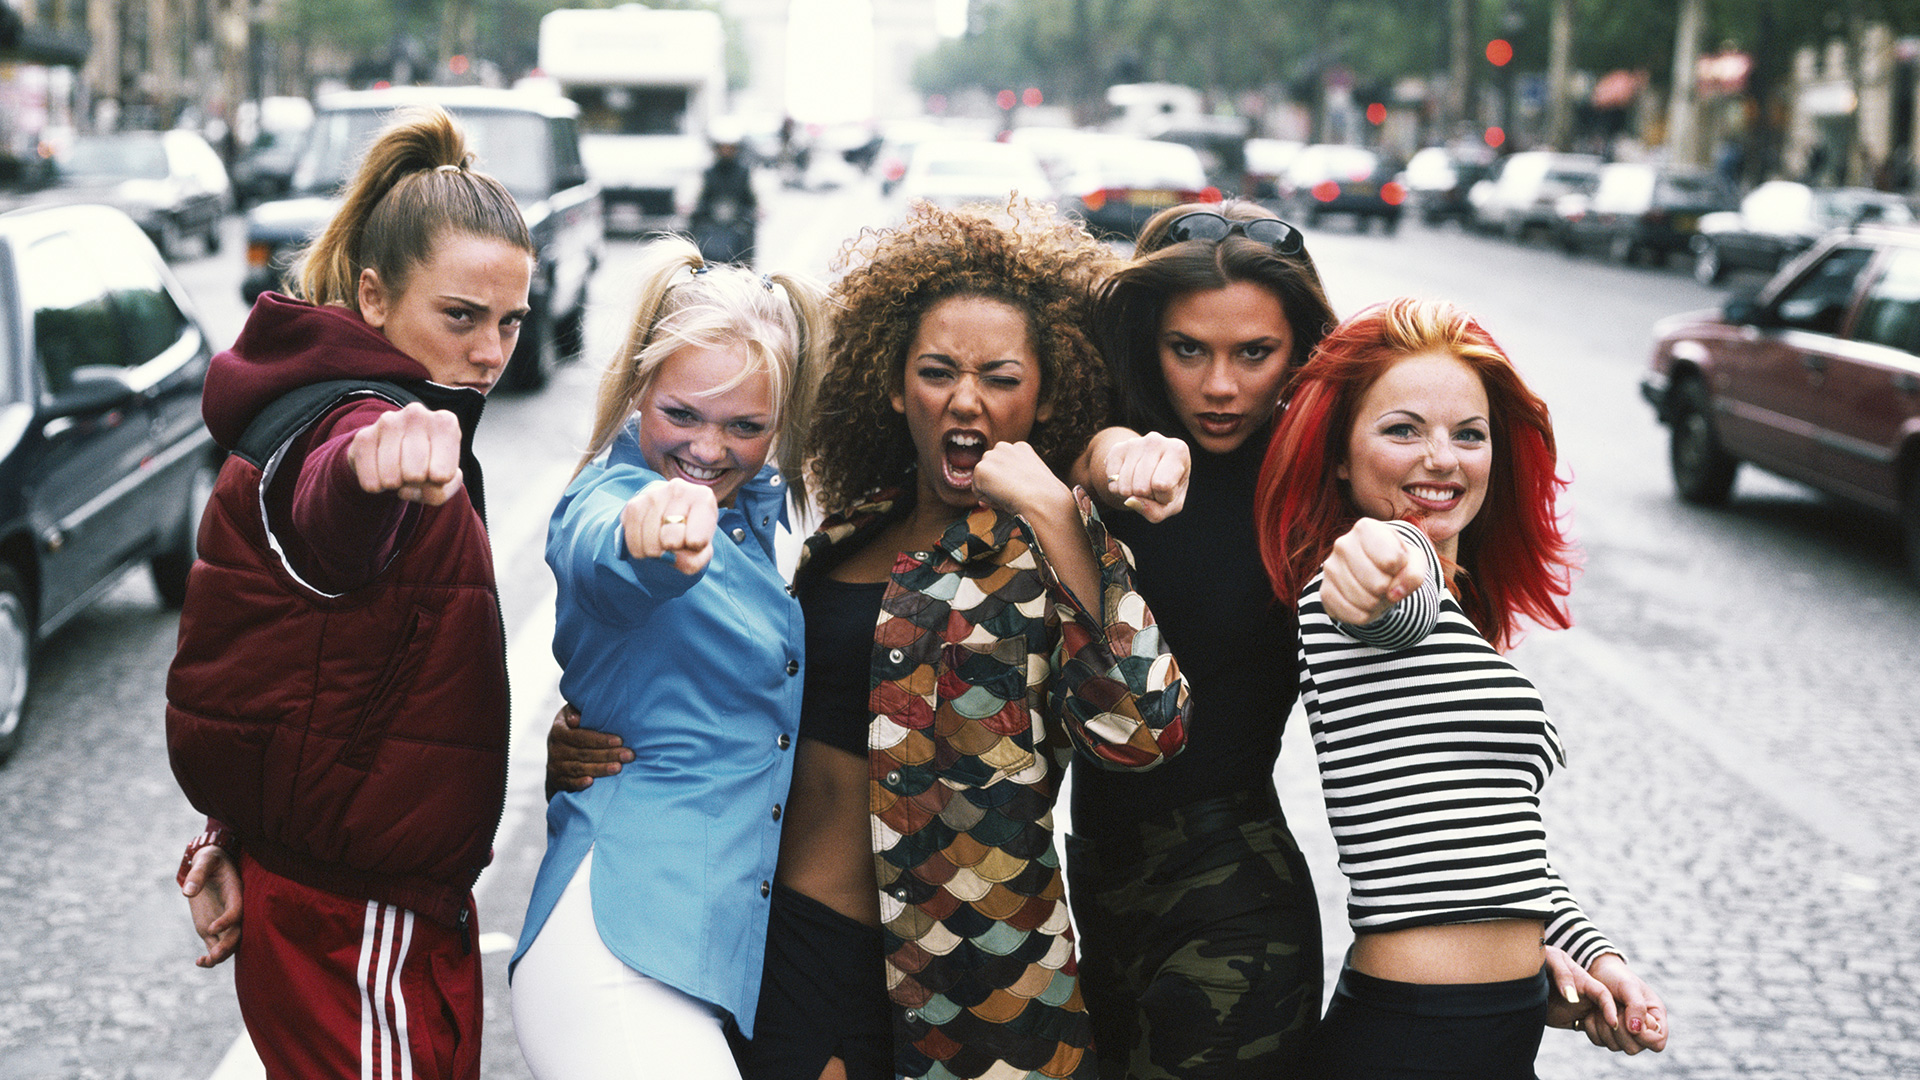 February 22, 1997: “Wannabe” by the Spice Girls Hit No. 1, Ushering in the Girl Power Era